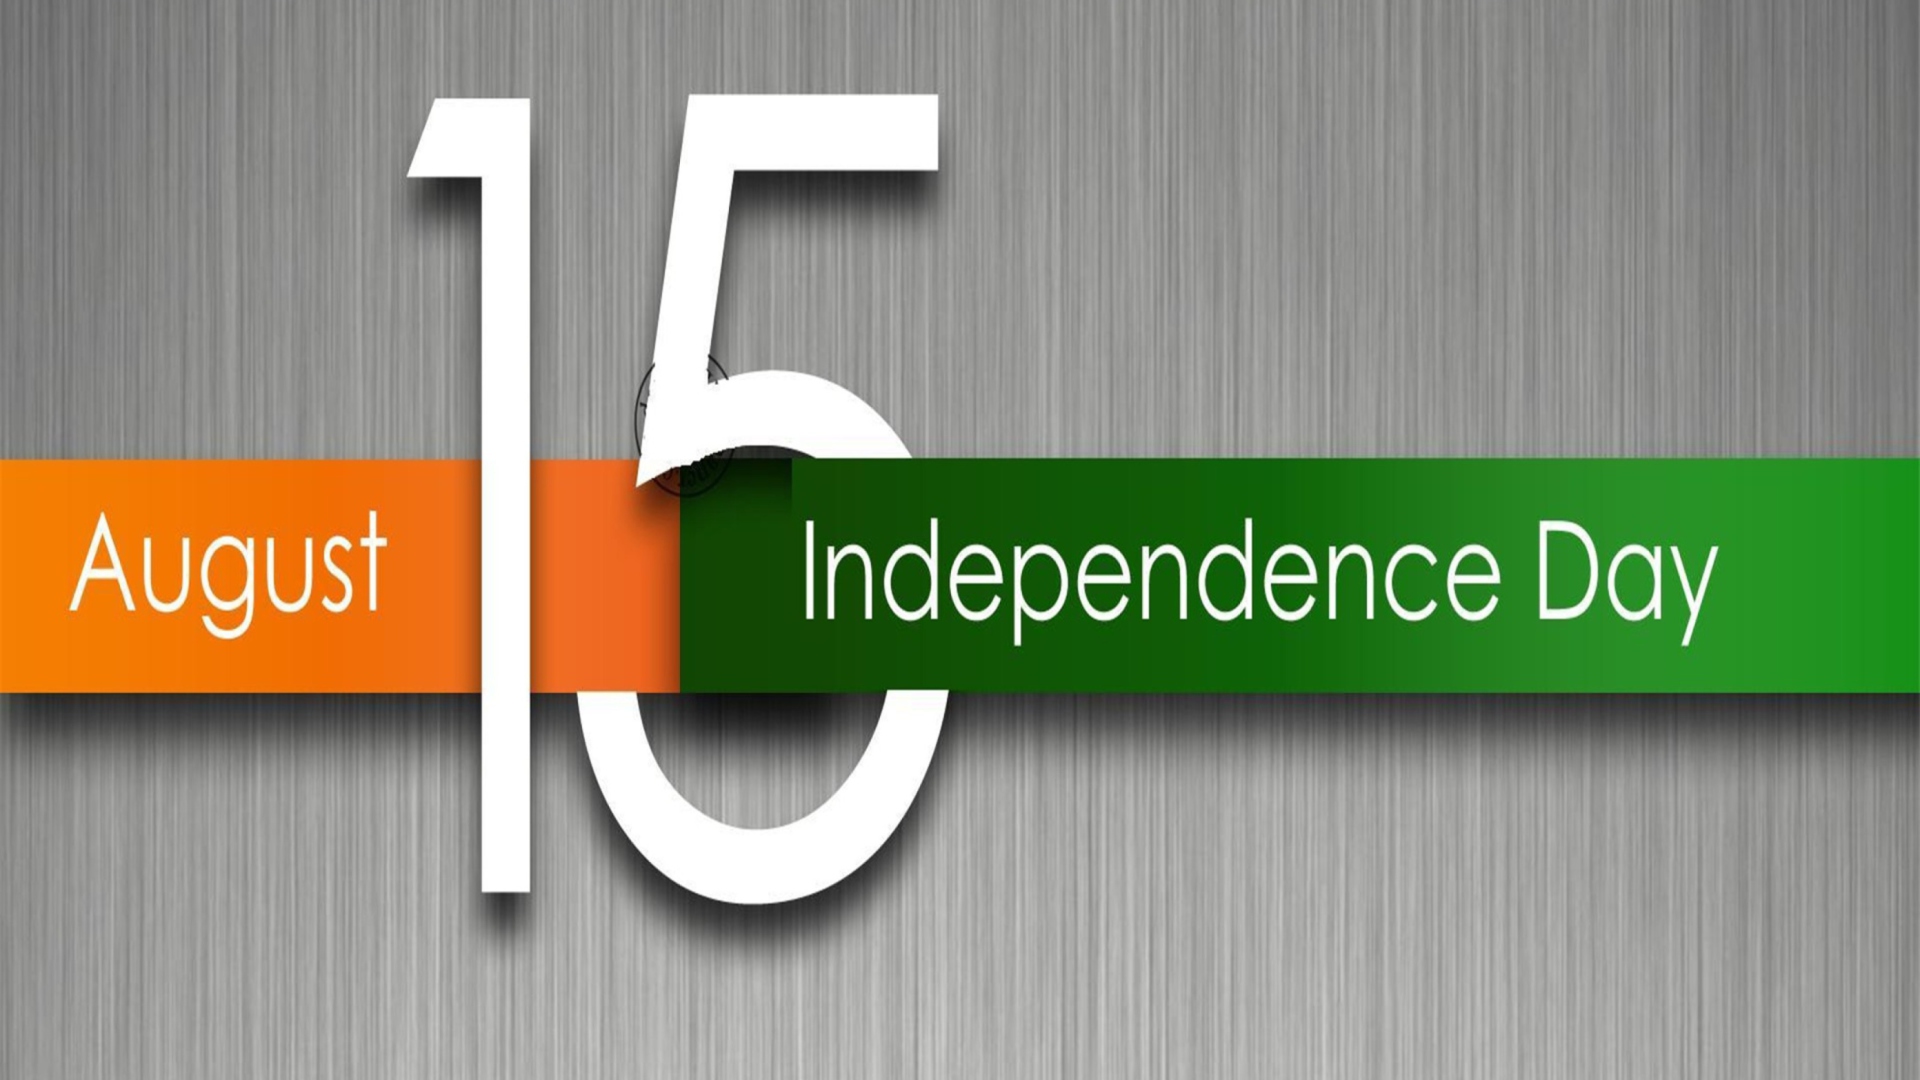 Independence Day in India wallpaper 1920x1080